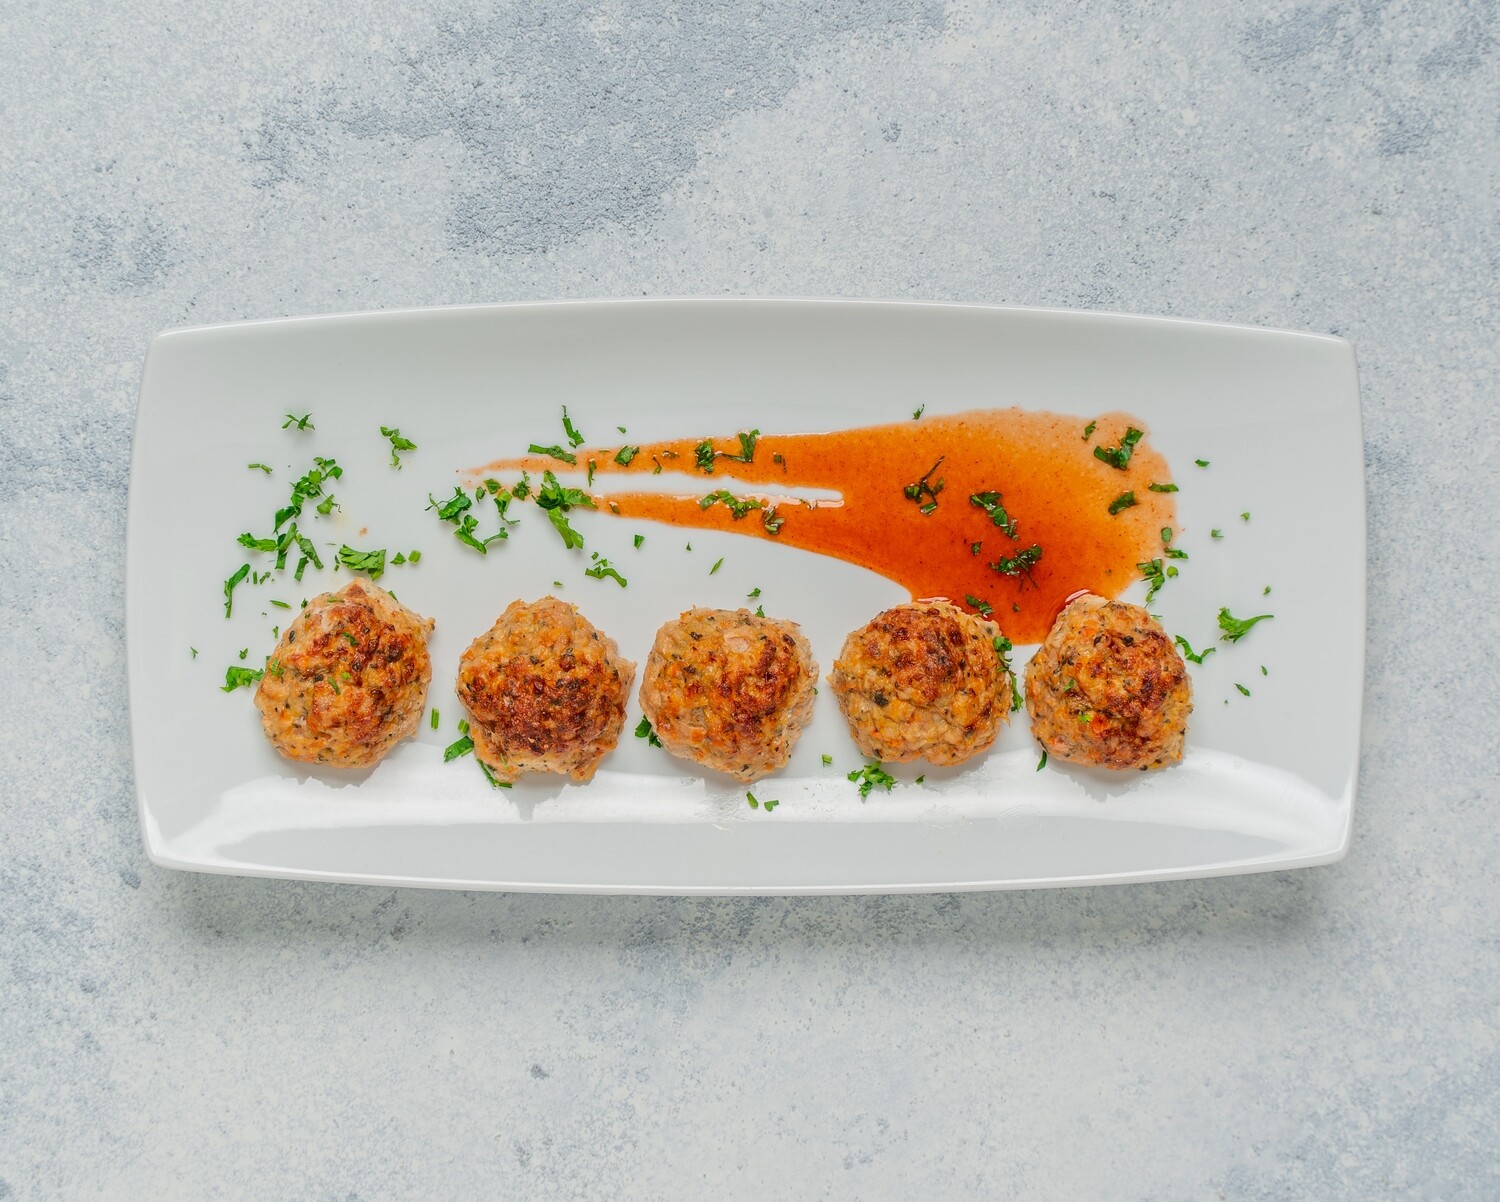 Chicken Meatballs with Dipping Sauce